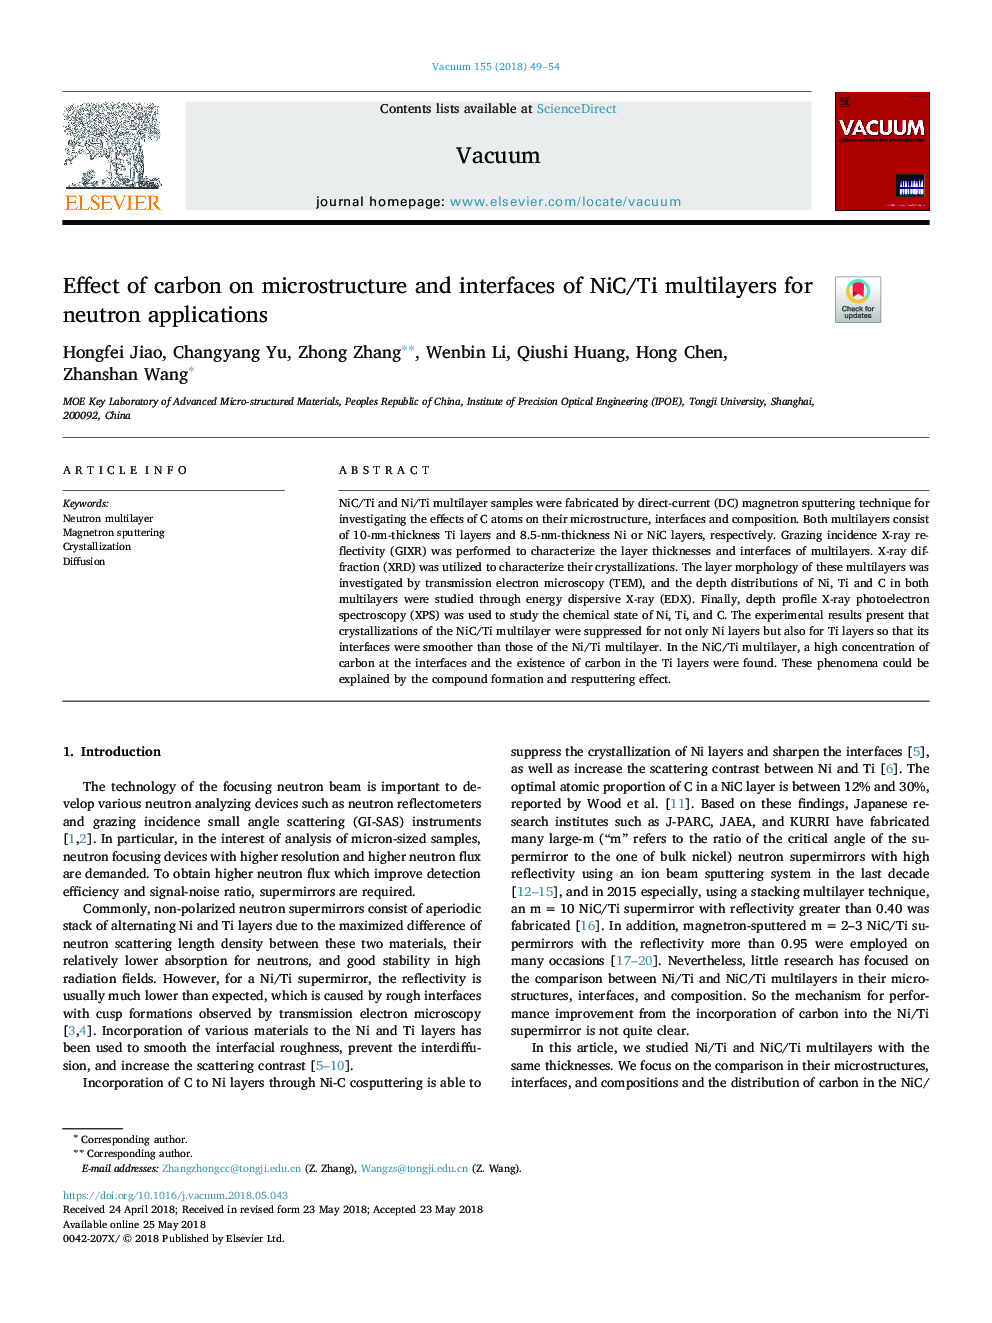 Effect of carbon on microstructure and interfaces of NiC/Ti multilayers for neutron applications